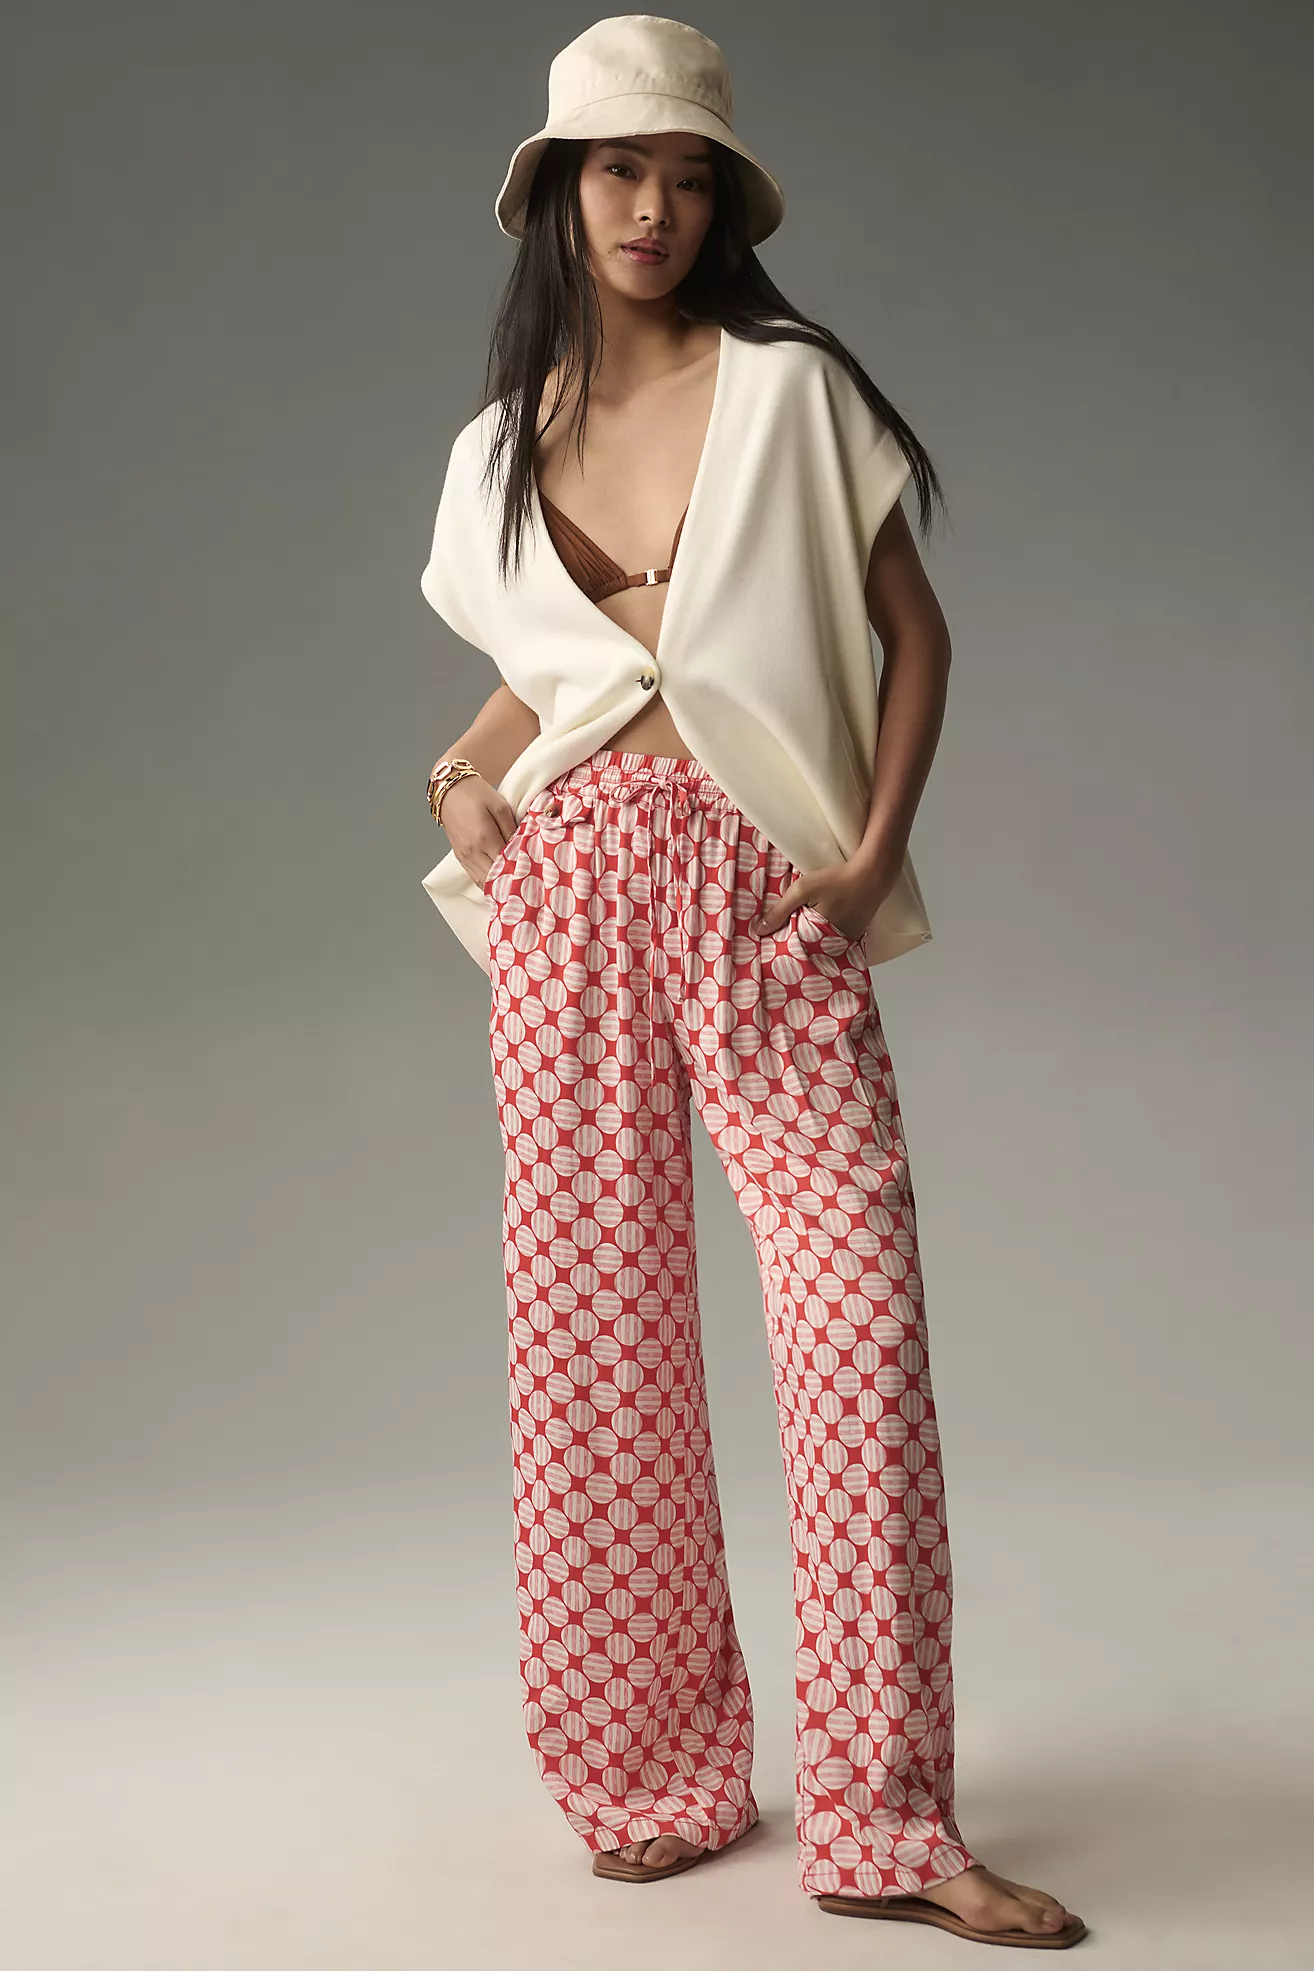 bold flowy pants for travel italy carry on | We Gotta Talk lifestyle blog & podcast by Sonni Abatta